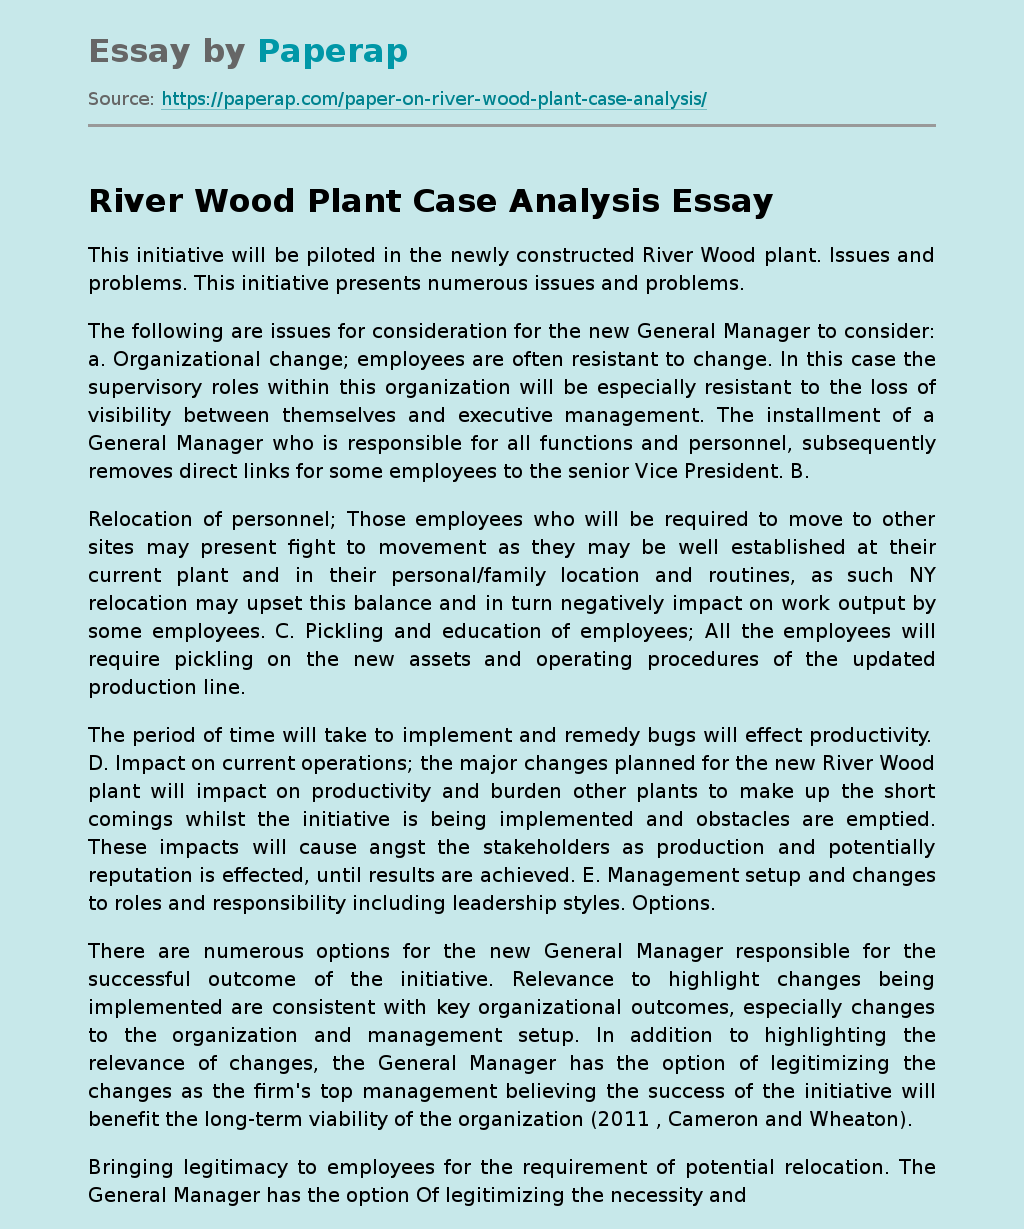 River Wood Plant Case Analysis